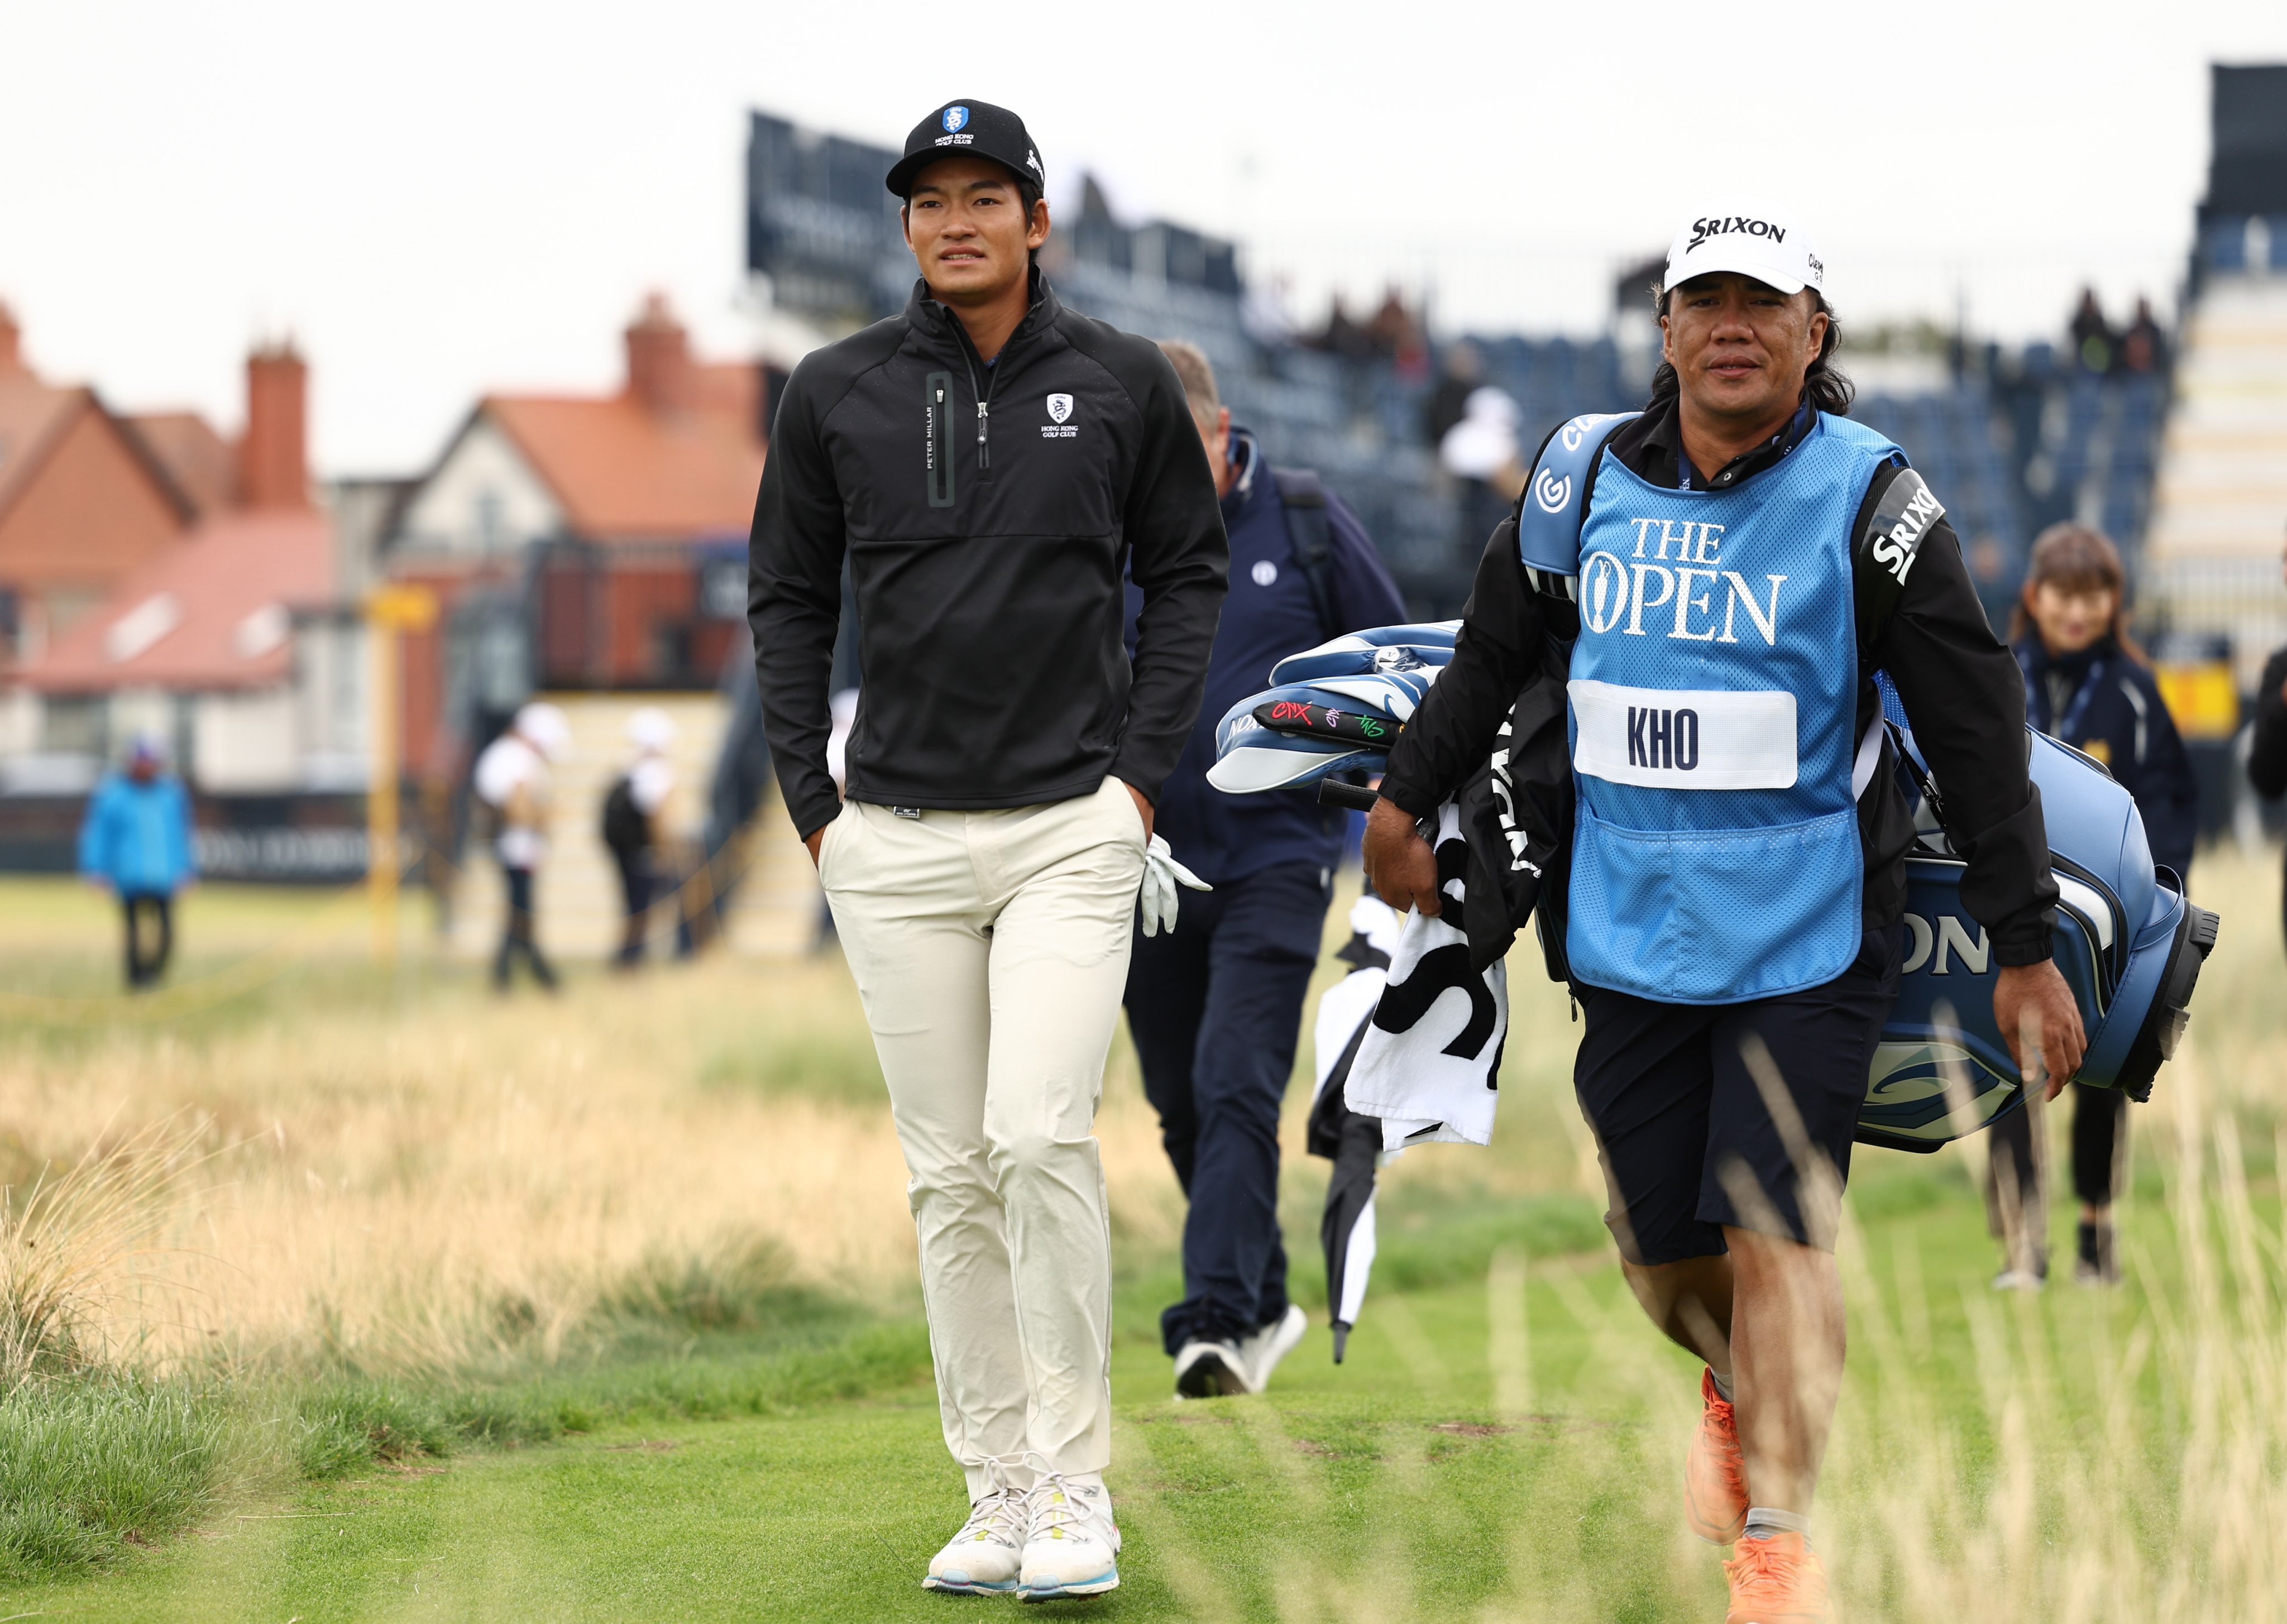 Taichi Kho and his caddie walk towards a fairway during a practice round at Royal Liverpool Golf Club. Photo: EPA-EFE